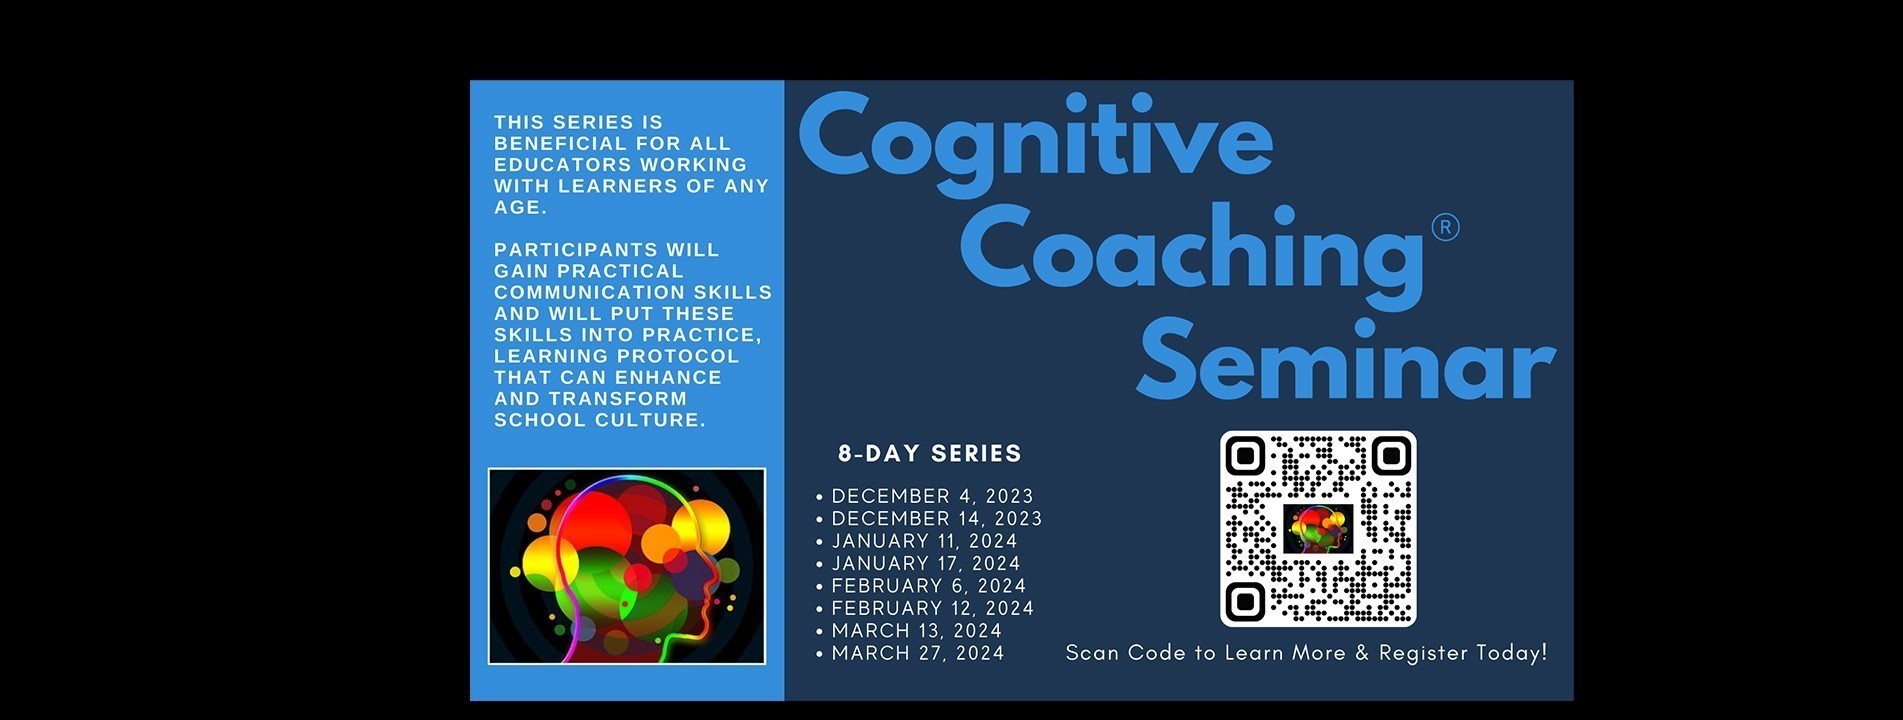 Cognitive Coaching Seminar. This series is beneficial for all educators working with learners of any age. Participants will gain practical communication skills and will put these skills into practice, learning protocol that can enhance and transform school culture. 8-day series: December 4, 2023; December 14, 2023; January 11, 2024; January 17, 2024; February 6, 2024, February 12, 2024; March 13, 2024; and March 27, 2024.  